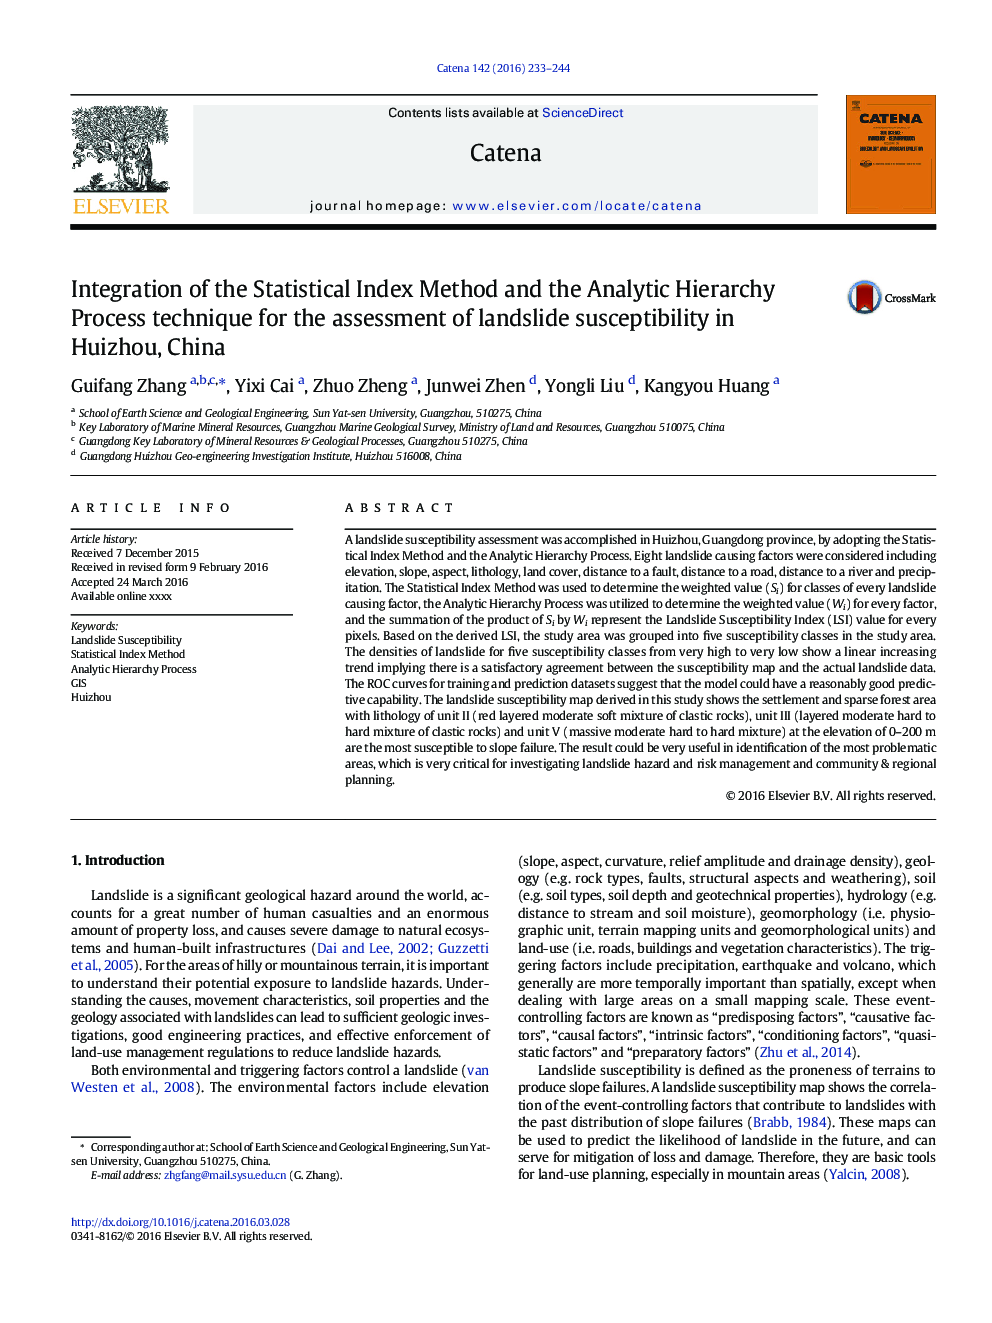 Integration of the Statistical Index Method and the Analytic Hierarchy Process technique for the assessment of landslide susceptibility in Huizhou, China